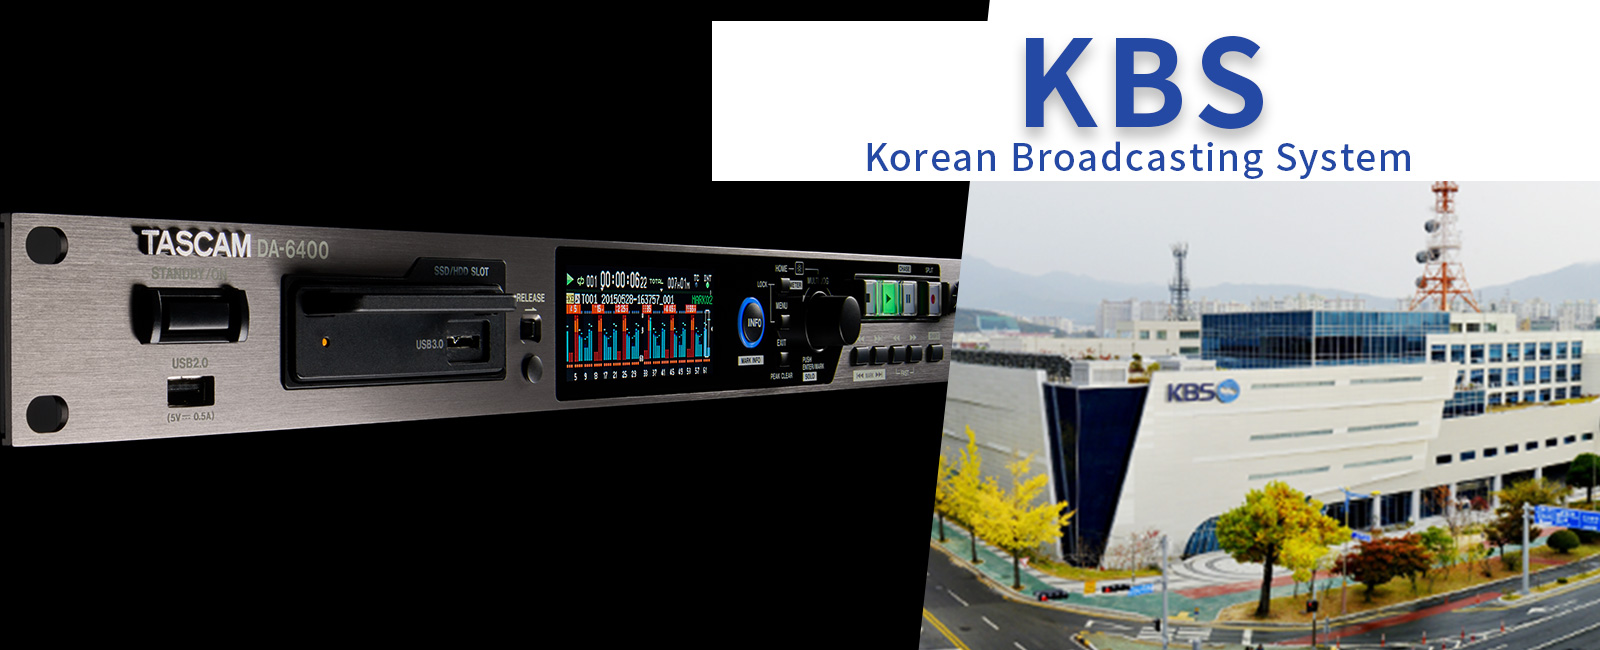 KBS introduces the TASCAM DA-6400 as the main recorder in three broadcasting facilities